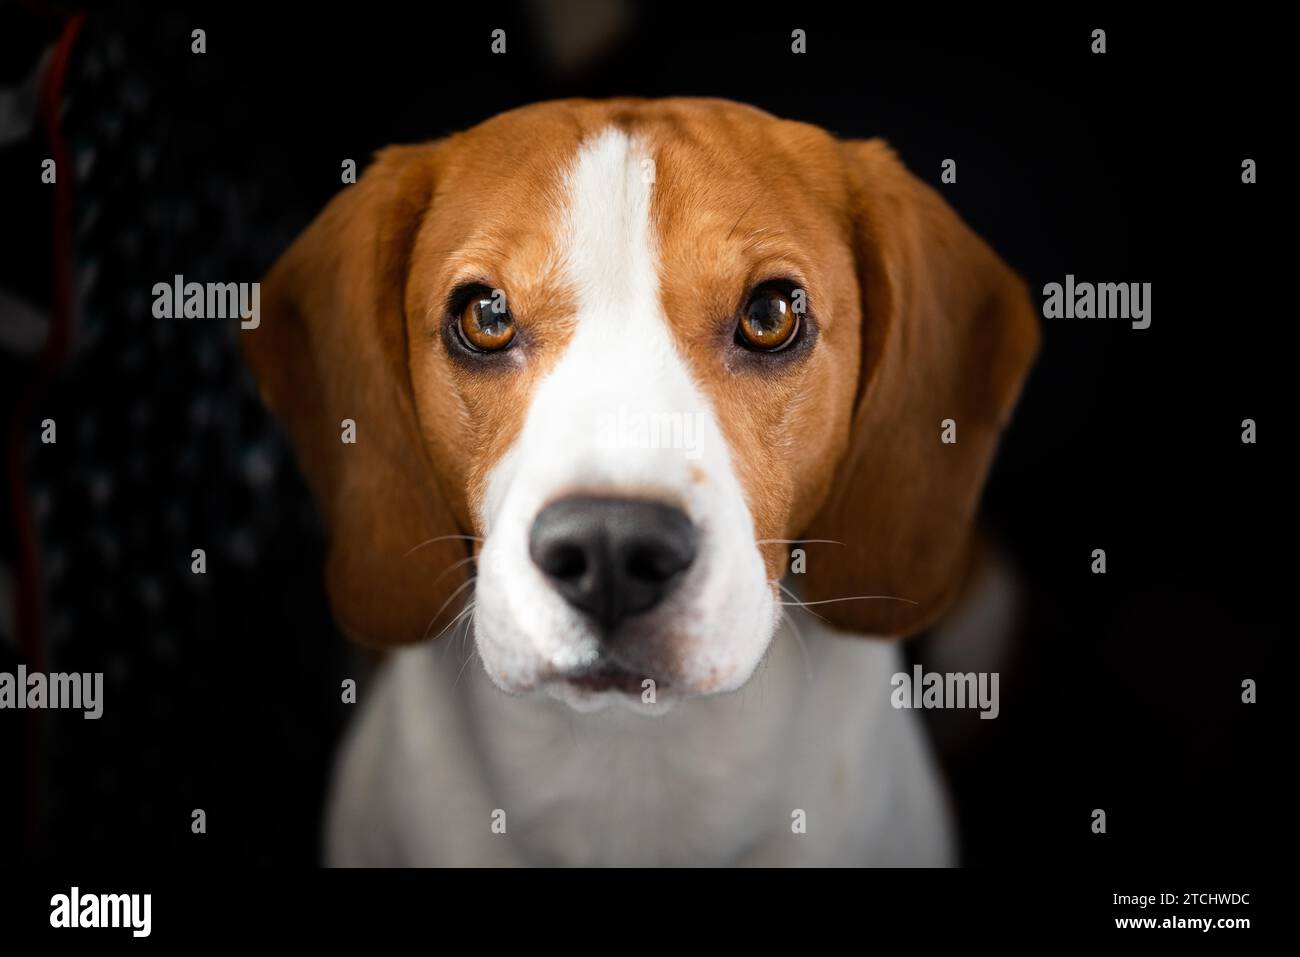 Beagle dog with big eyes sits and looking up towards the camera. Portrait dark background Stock Photo